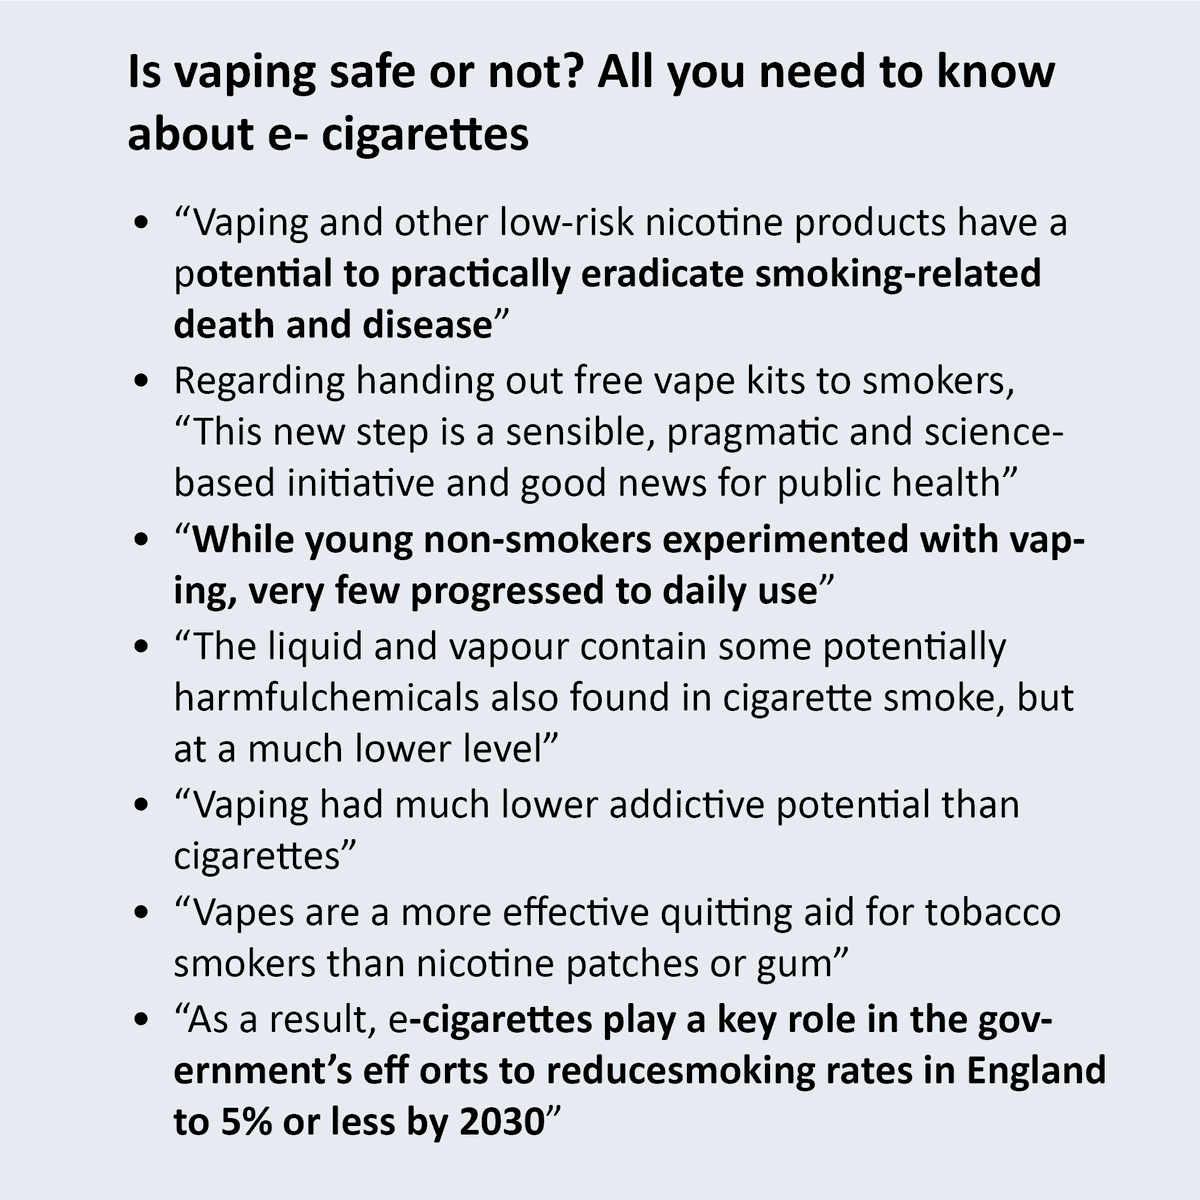 What? An accurate, evidence-based article on #vaping in @guardian Oh...I see, it is not @GuardianAus and Melissa Davey was not involved. This time they quote REAL experts Professors Peter Hajek and Alan Boobis and give the facts A refreshing change theguardian.com/society/2023/a…